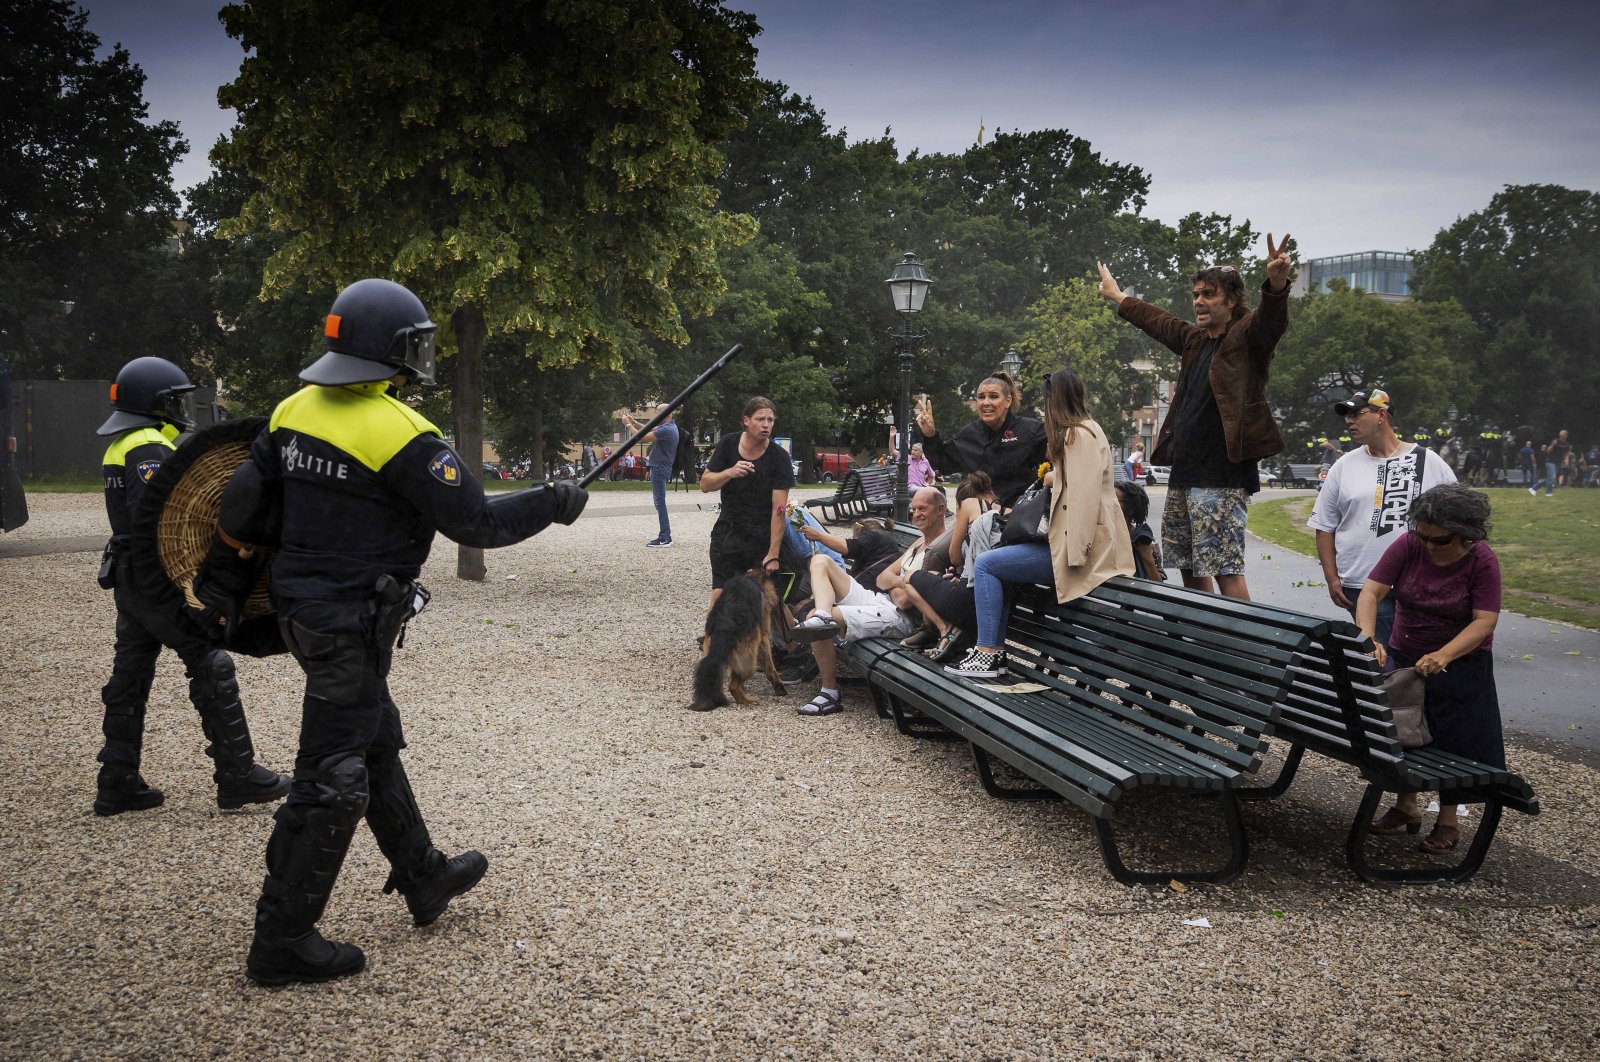 Police face protesters in the center of The Hague, Netherlands, 21 June 2020. (EPA Photo)